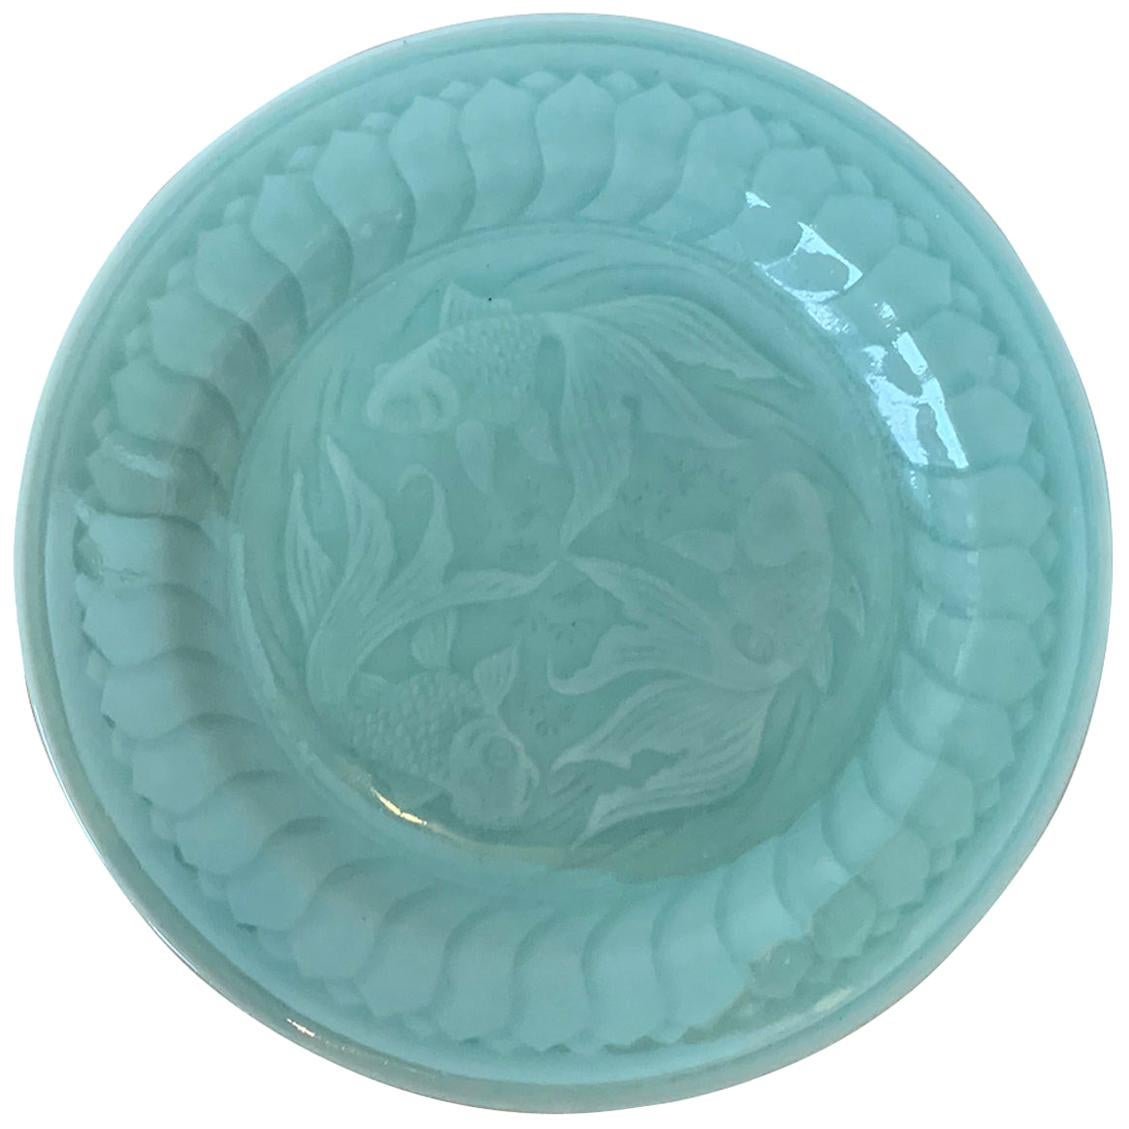 Early 20th Century Chinese Celadon Pottery Koi Fish Plate 4 Character Reign Mark